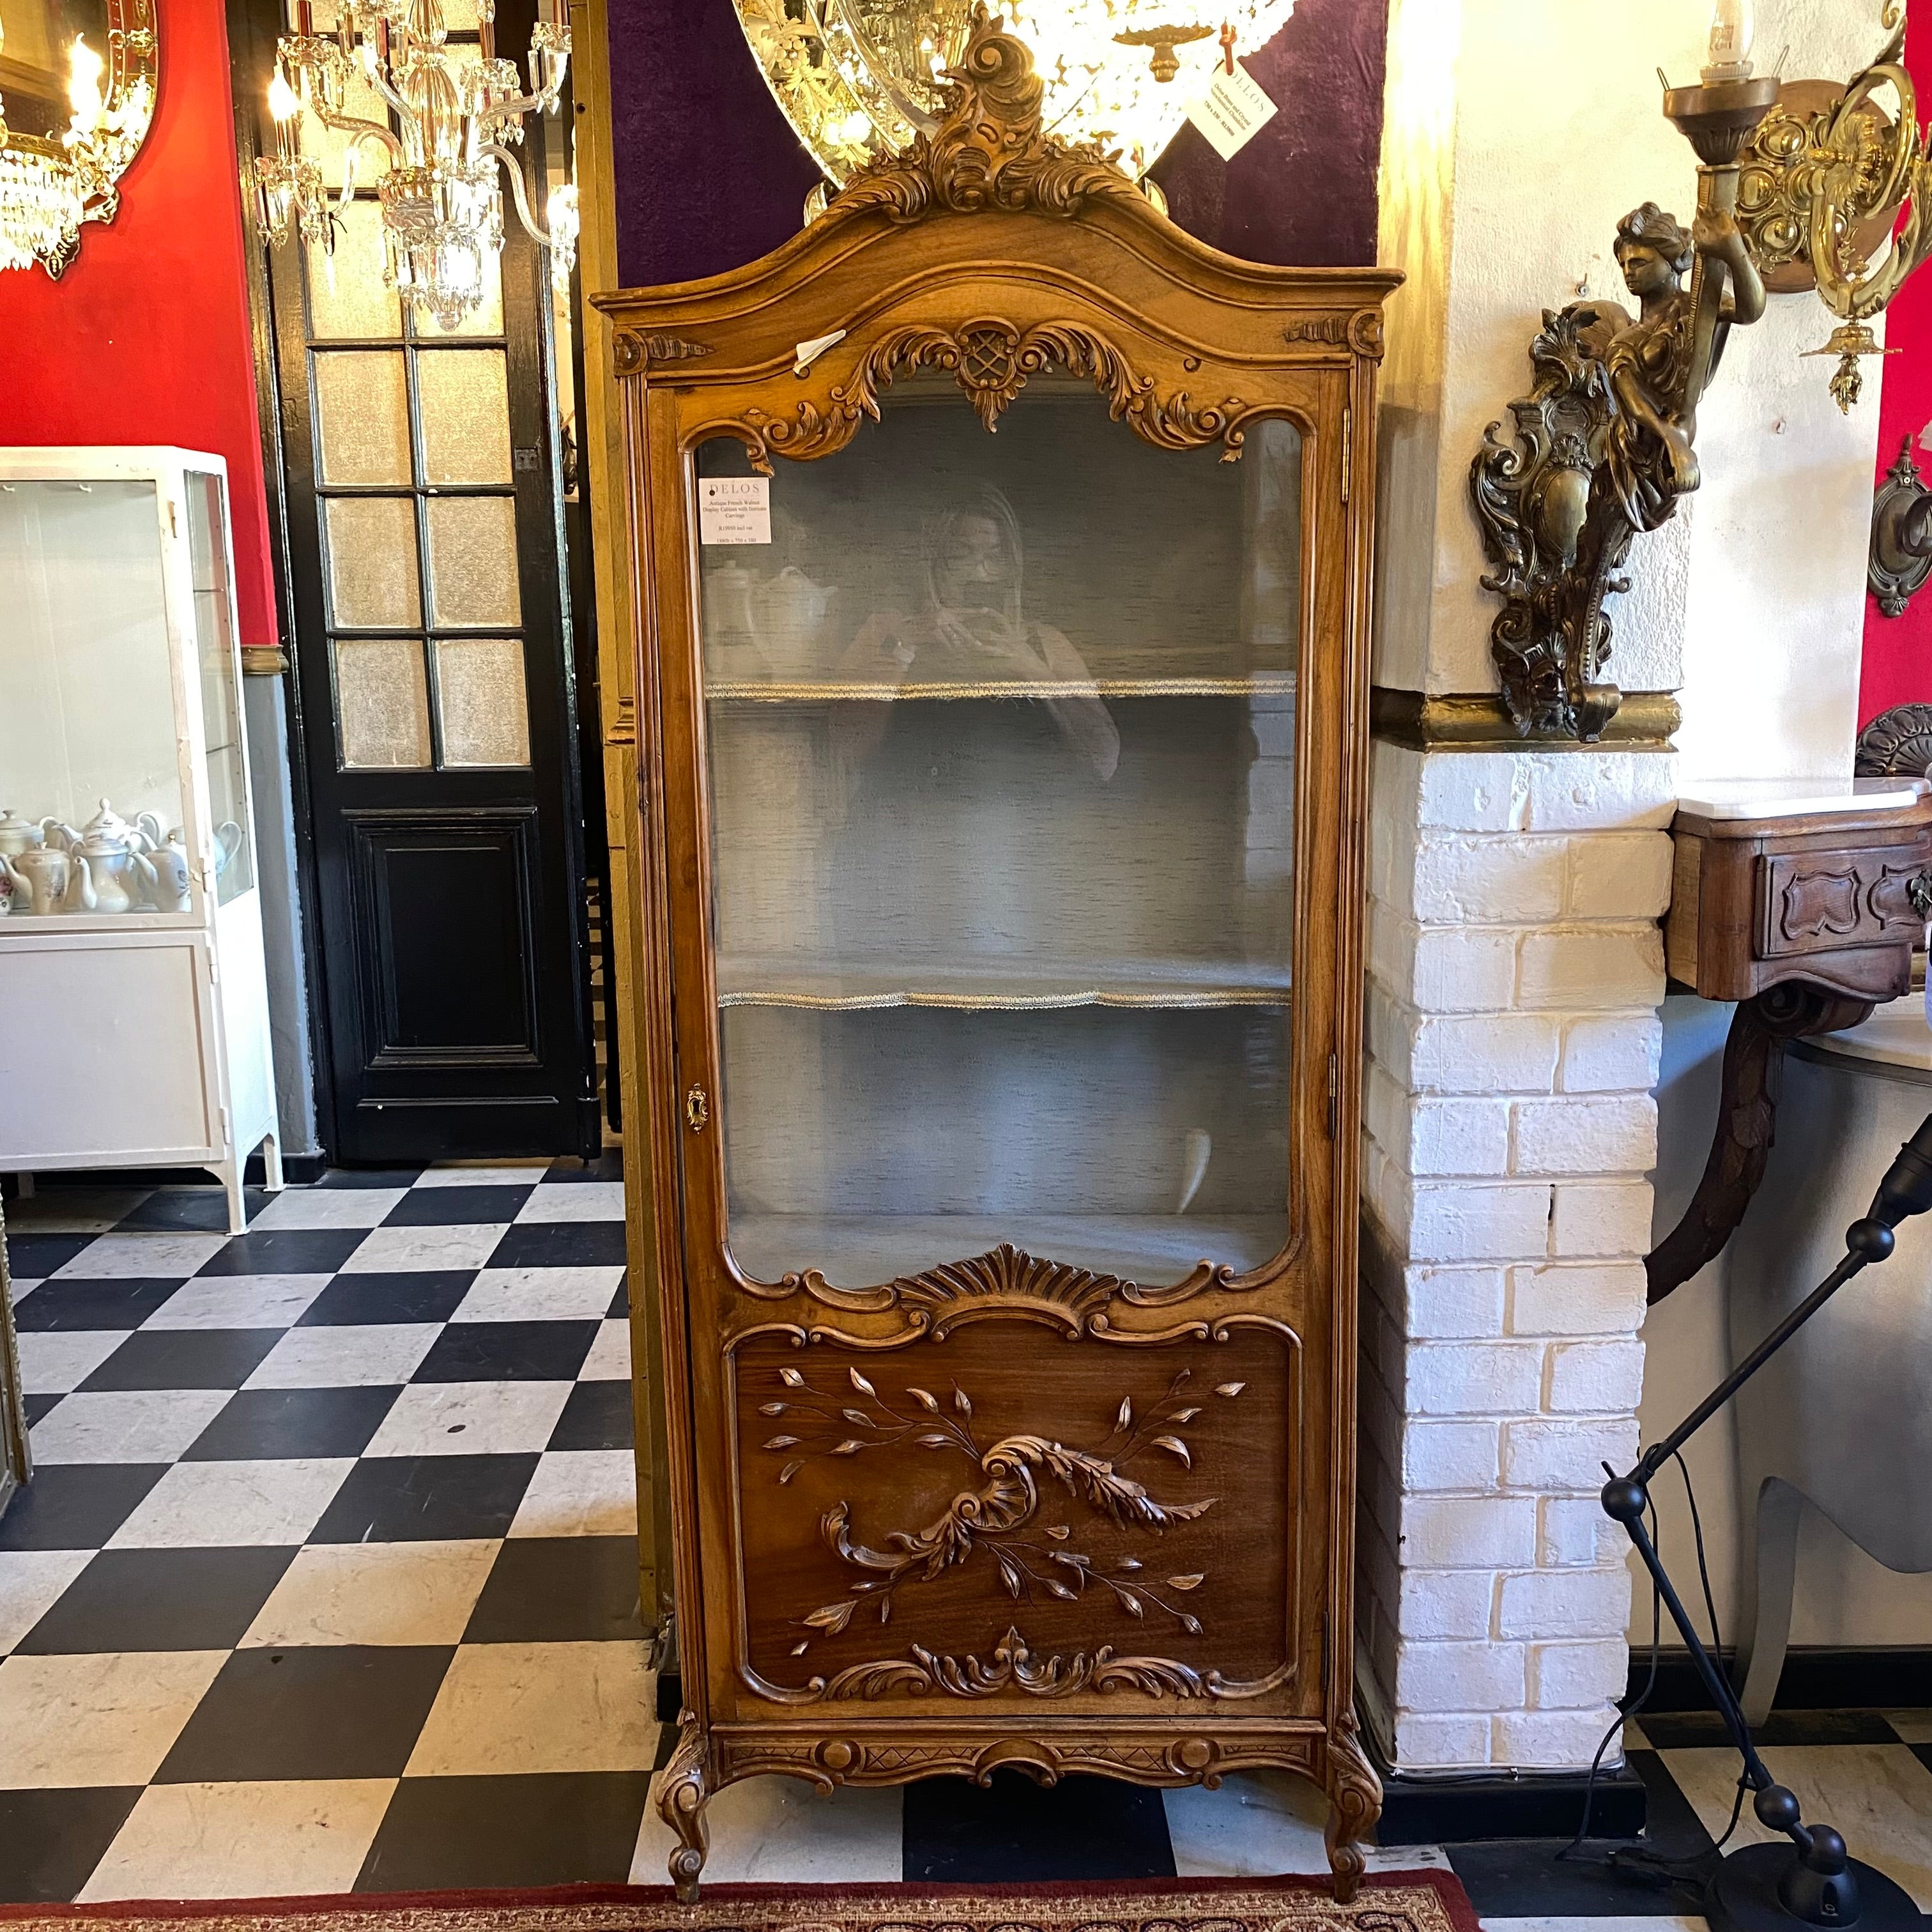 Antique French Walnut Display Cabinet with Intricate Carvings